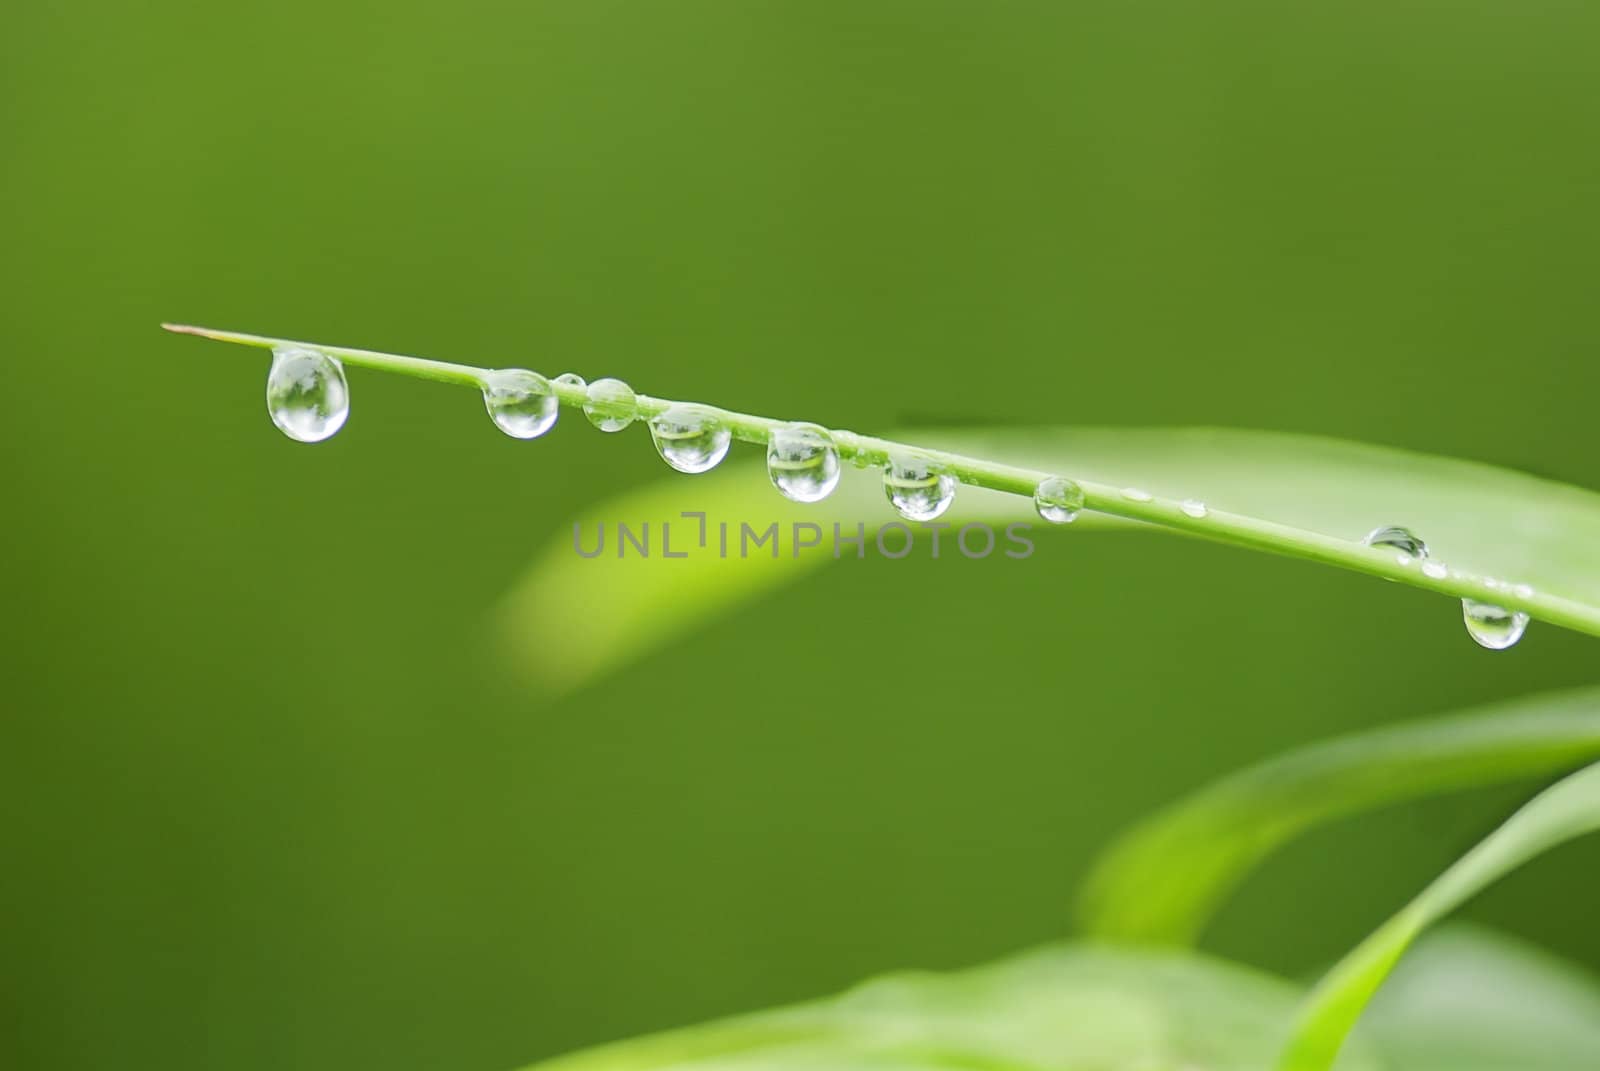 The bamboo after the rain by xfdly5